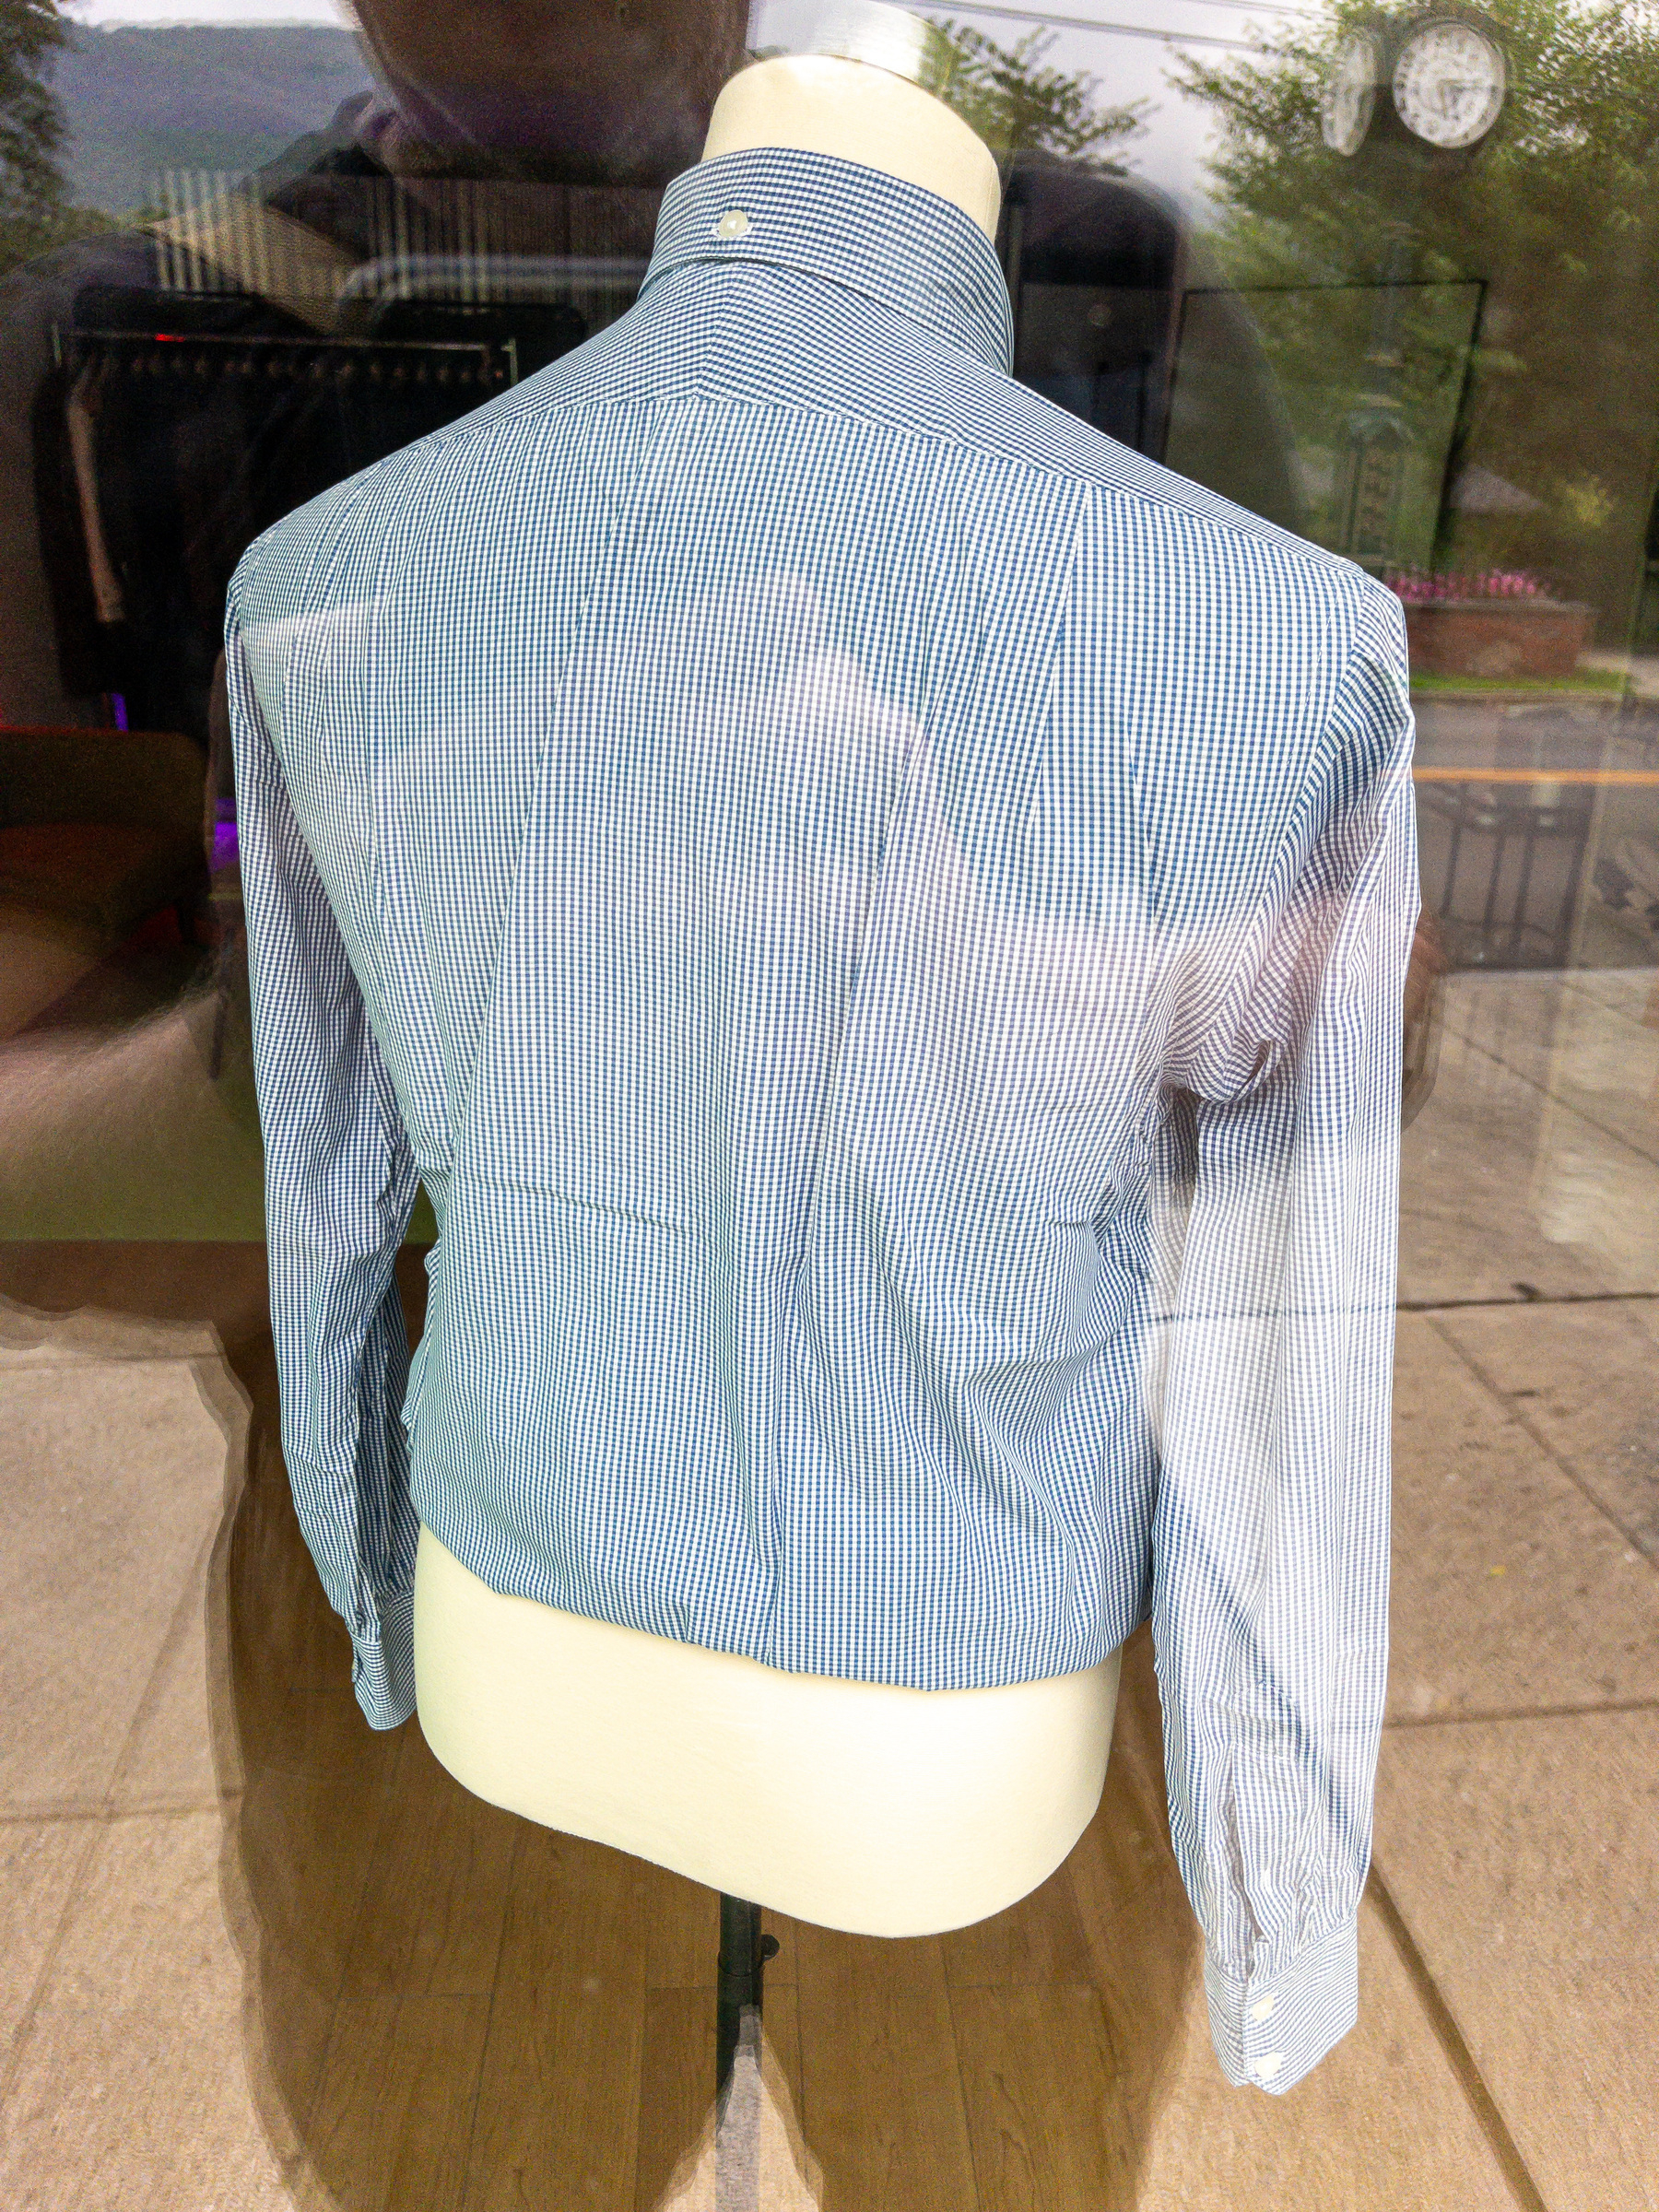 Back of a gray and white fine plaid men’s shirt on a bust mannequin in a fine tailoring shop.